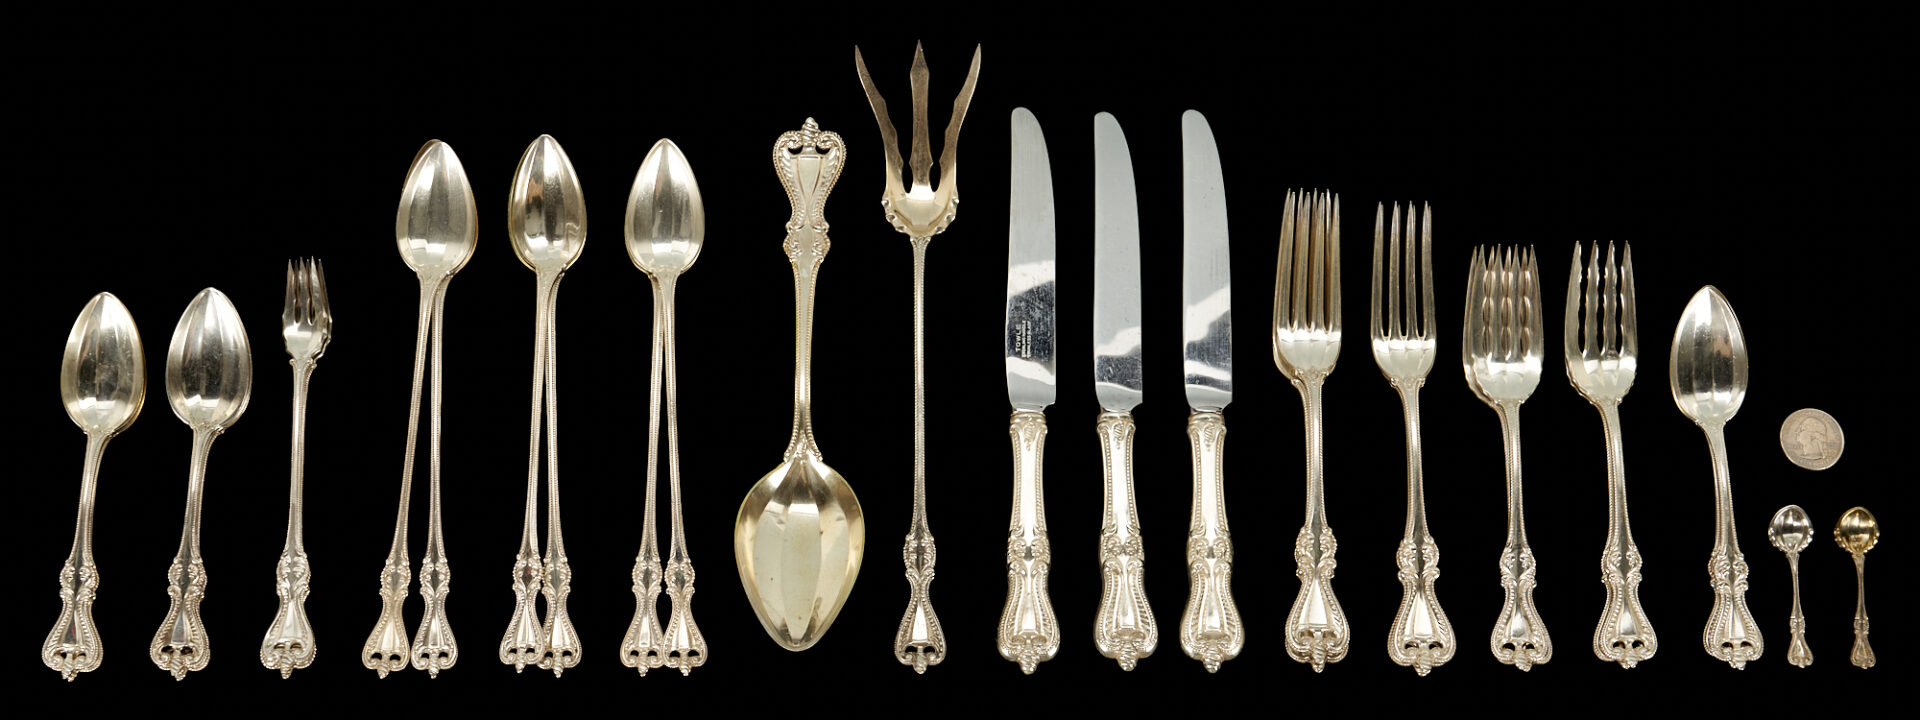 Lot 446: 30 pcs. Towle Old Colonial Sterling Silver Flatware